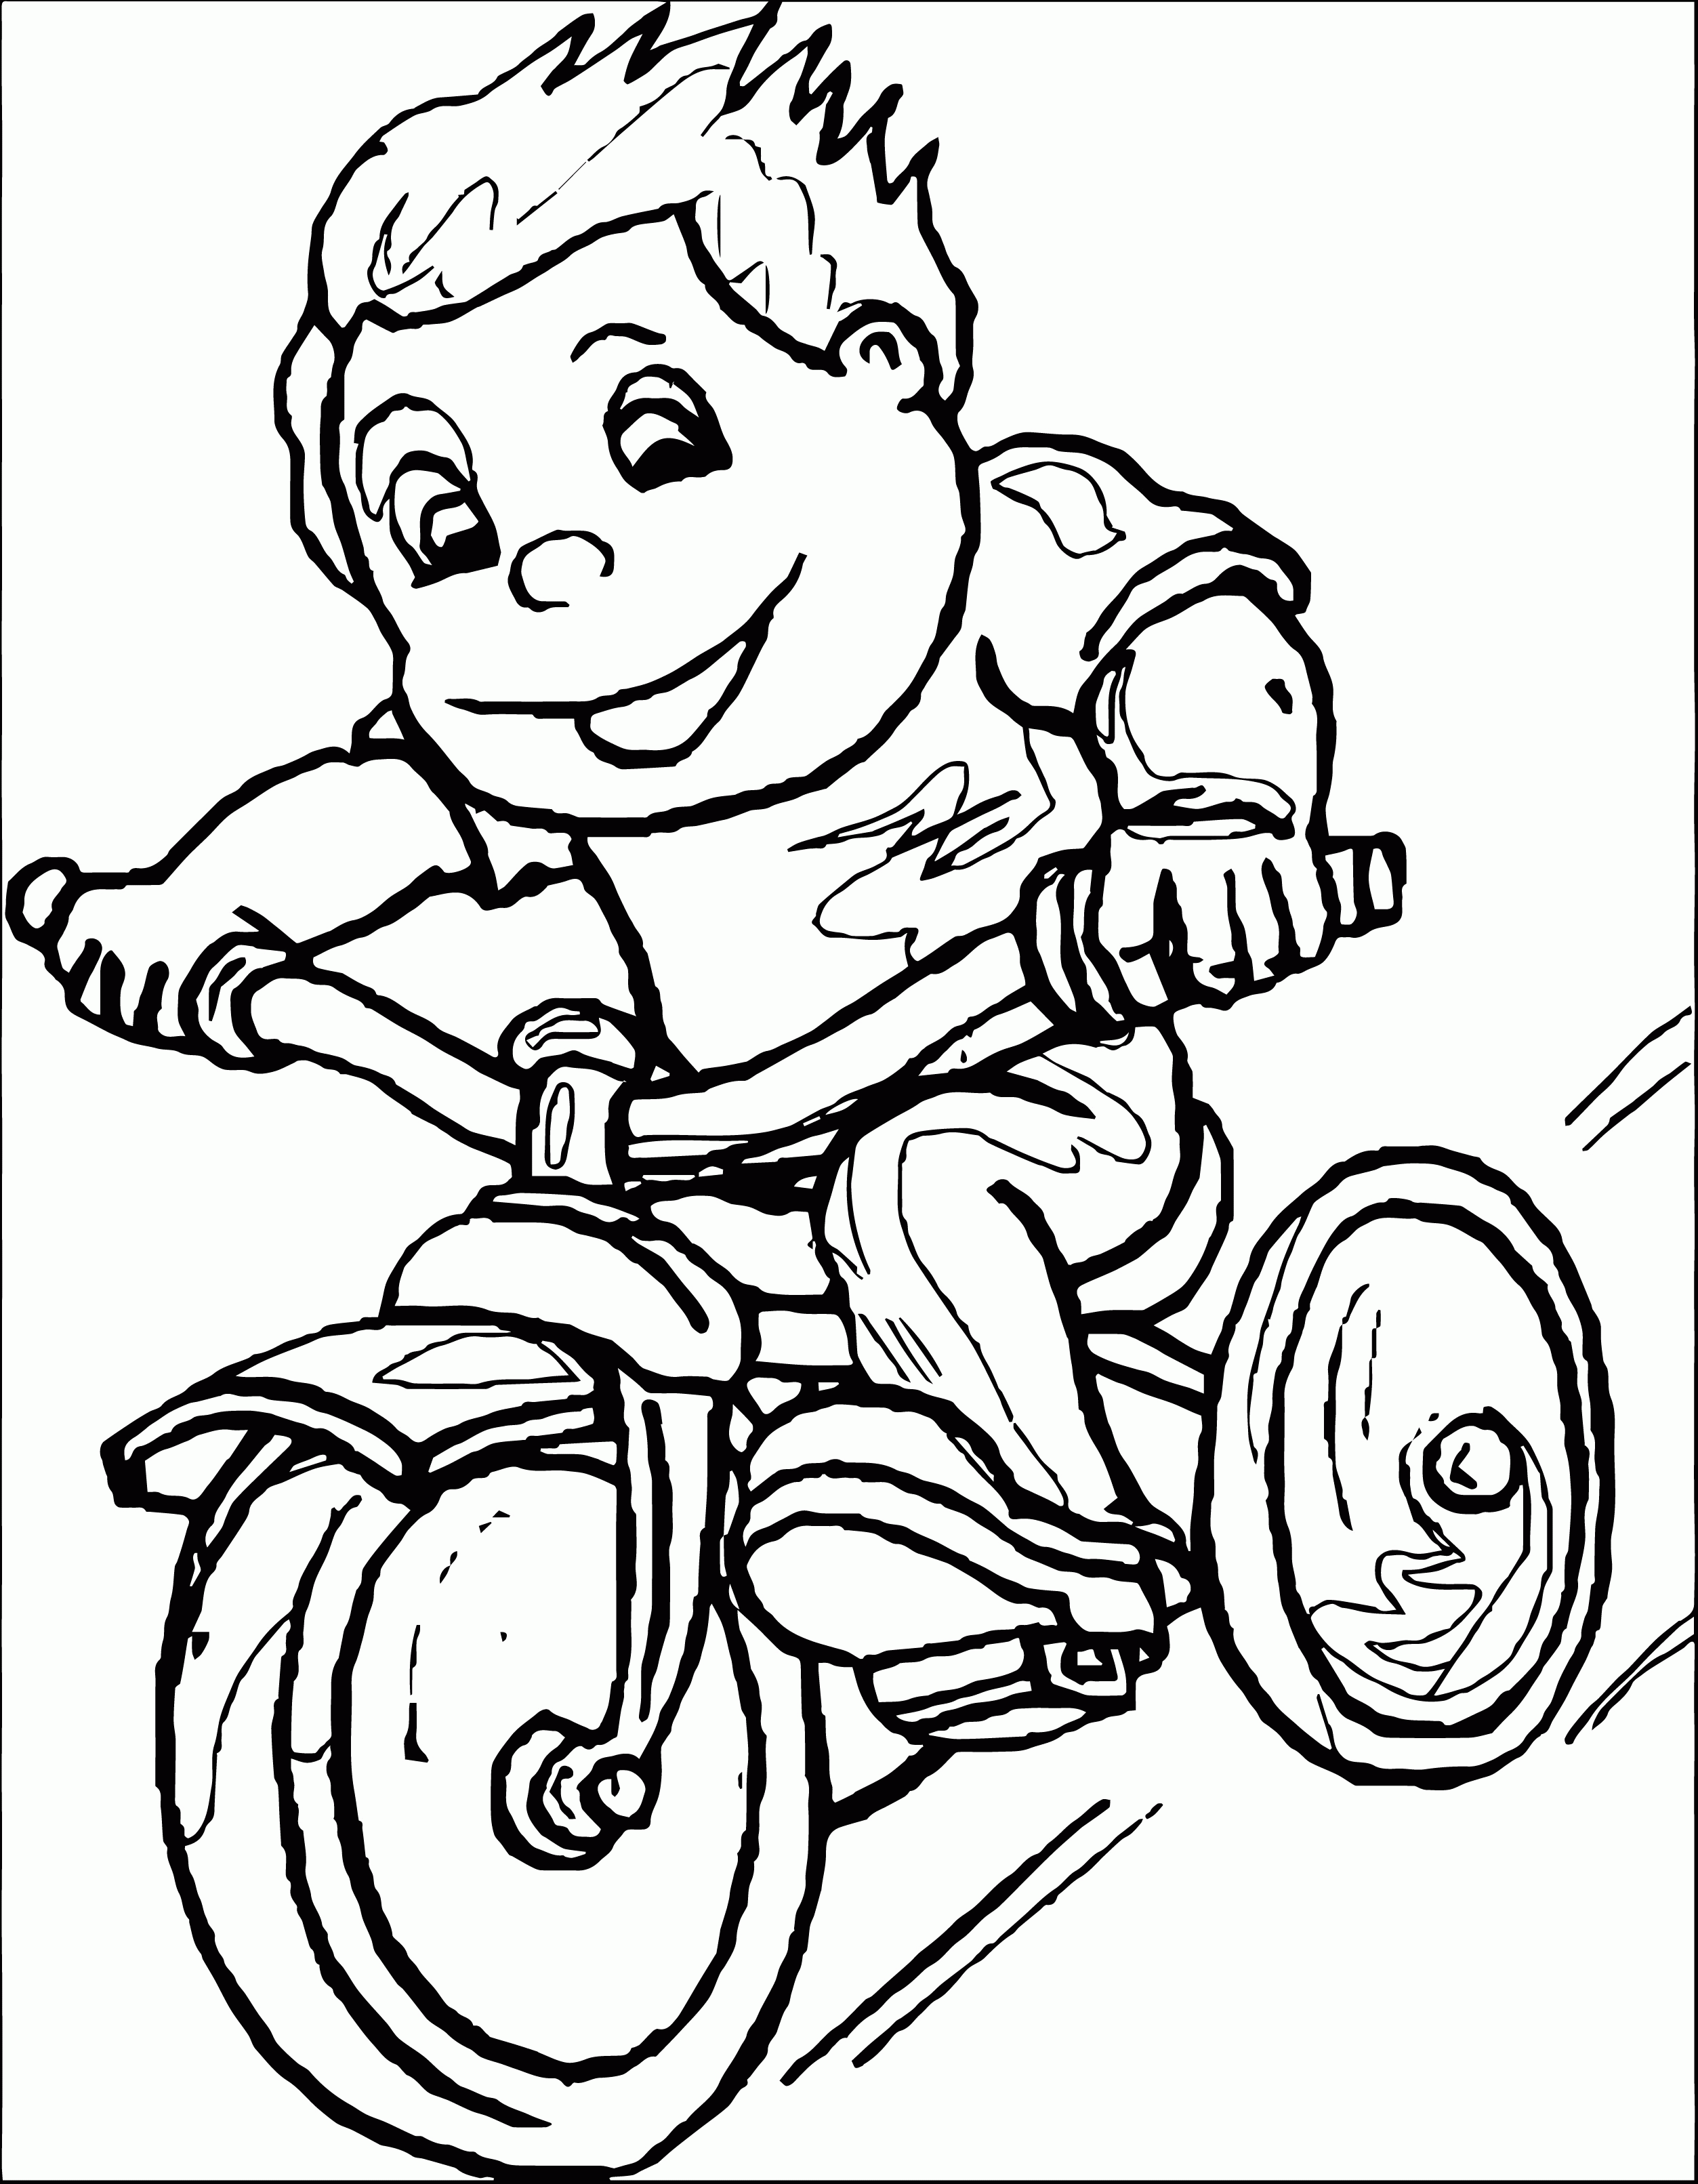 kids-riding-bikes-coloring-pages-today-we-paint-the-boss-baby-and-tim